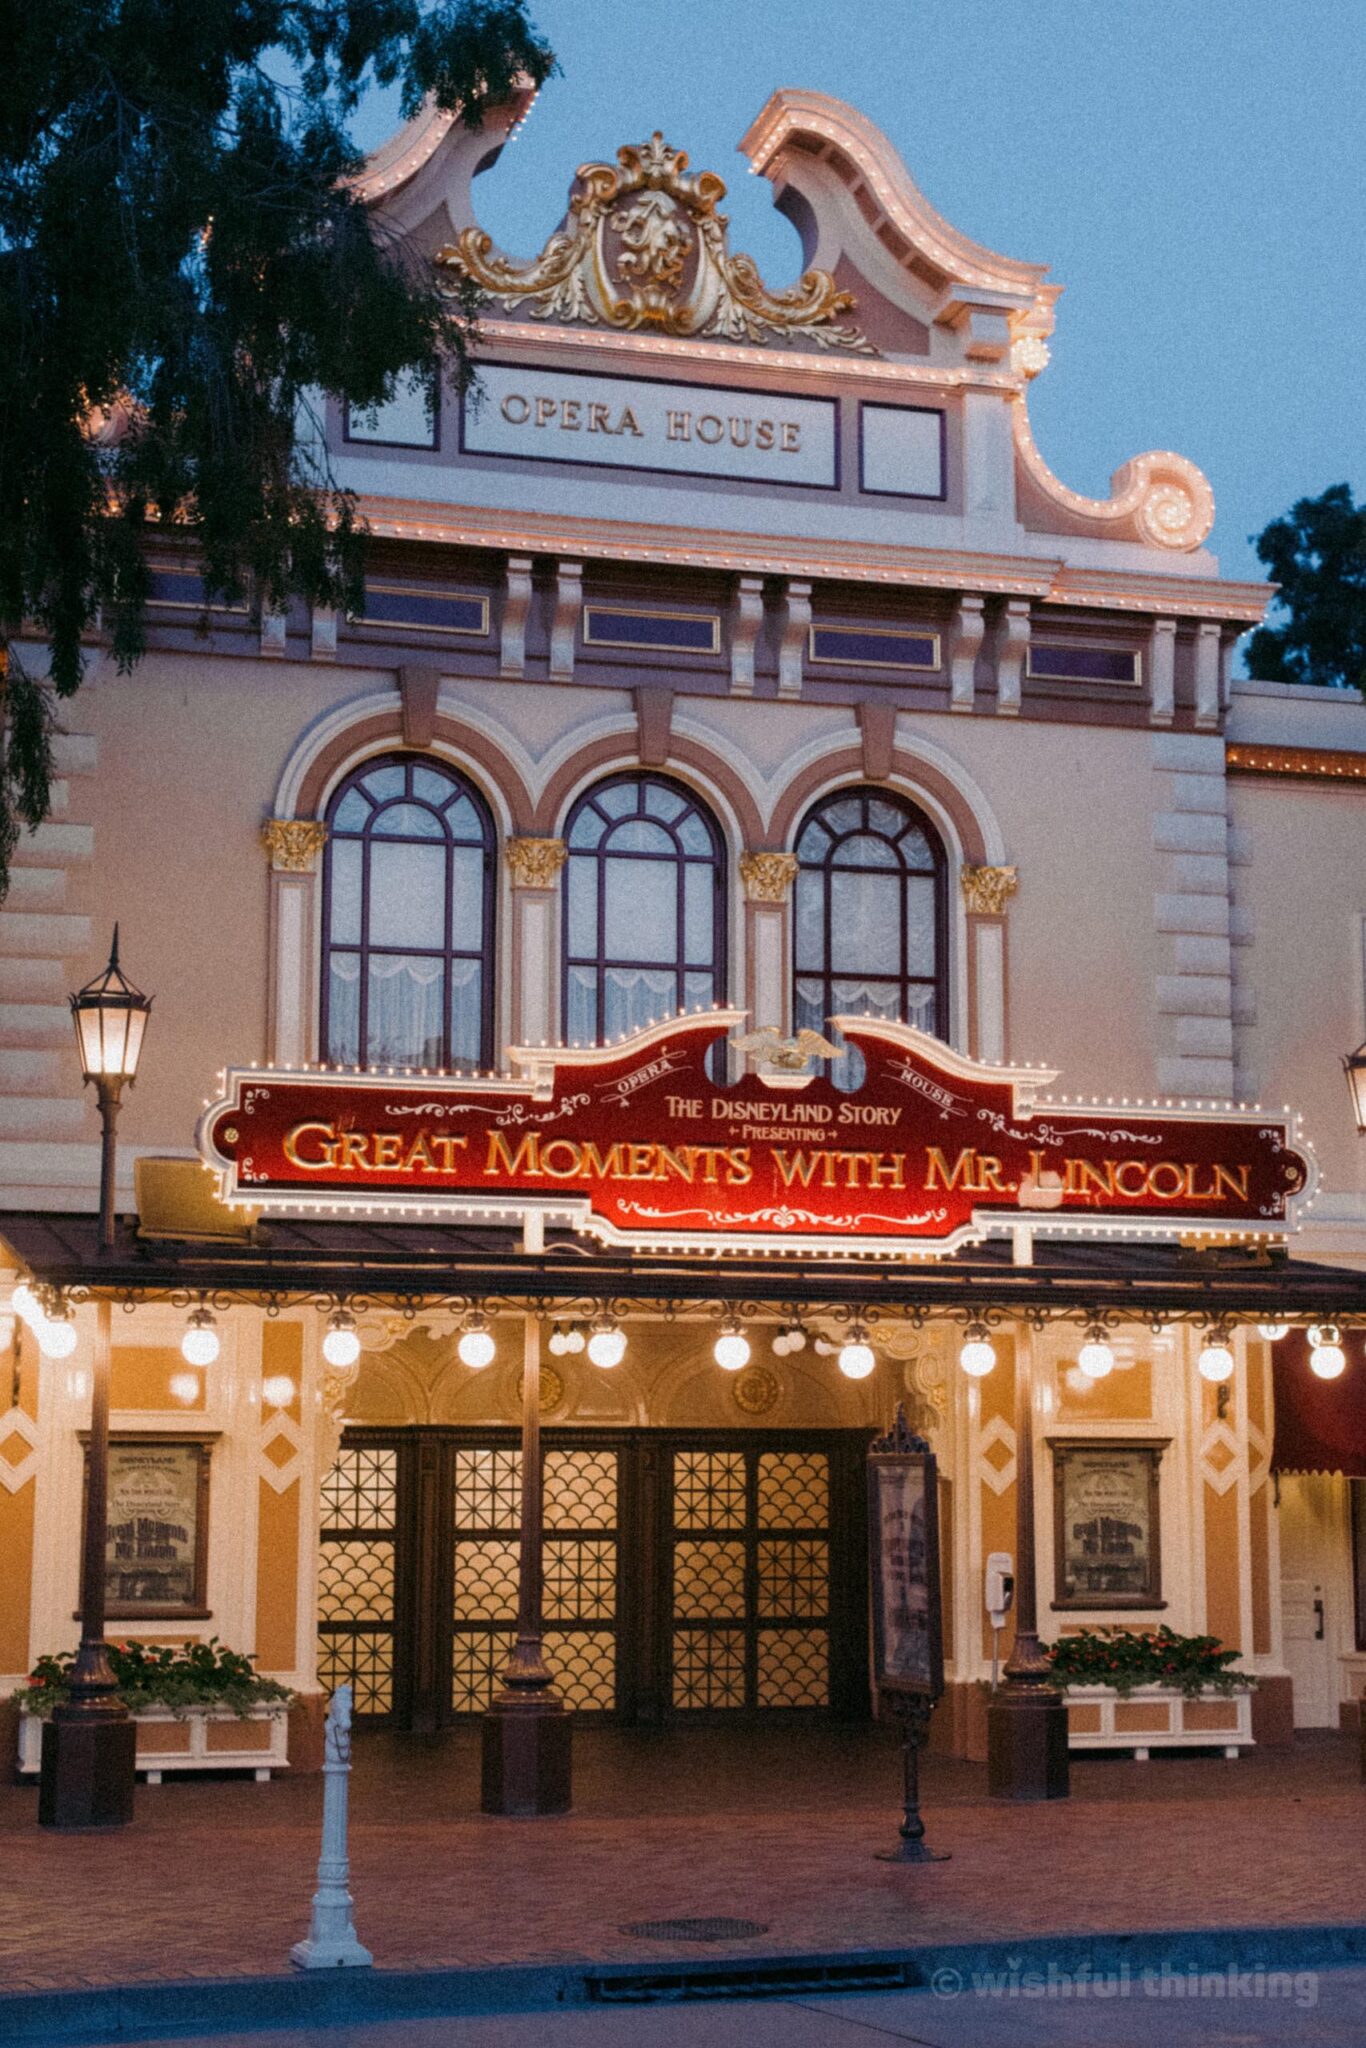 At the entrance to Disneyland Park, the historic attraction Great Moments with Mister Lincoln invites Guests to Disney's first Audio-Animatronic